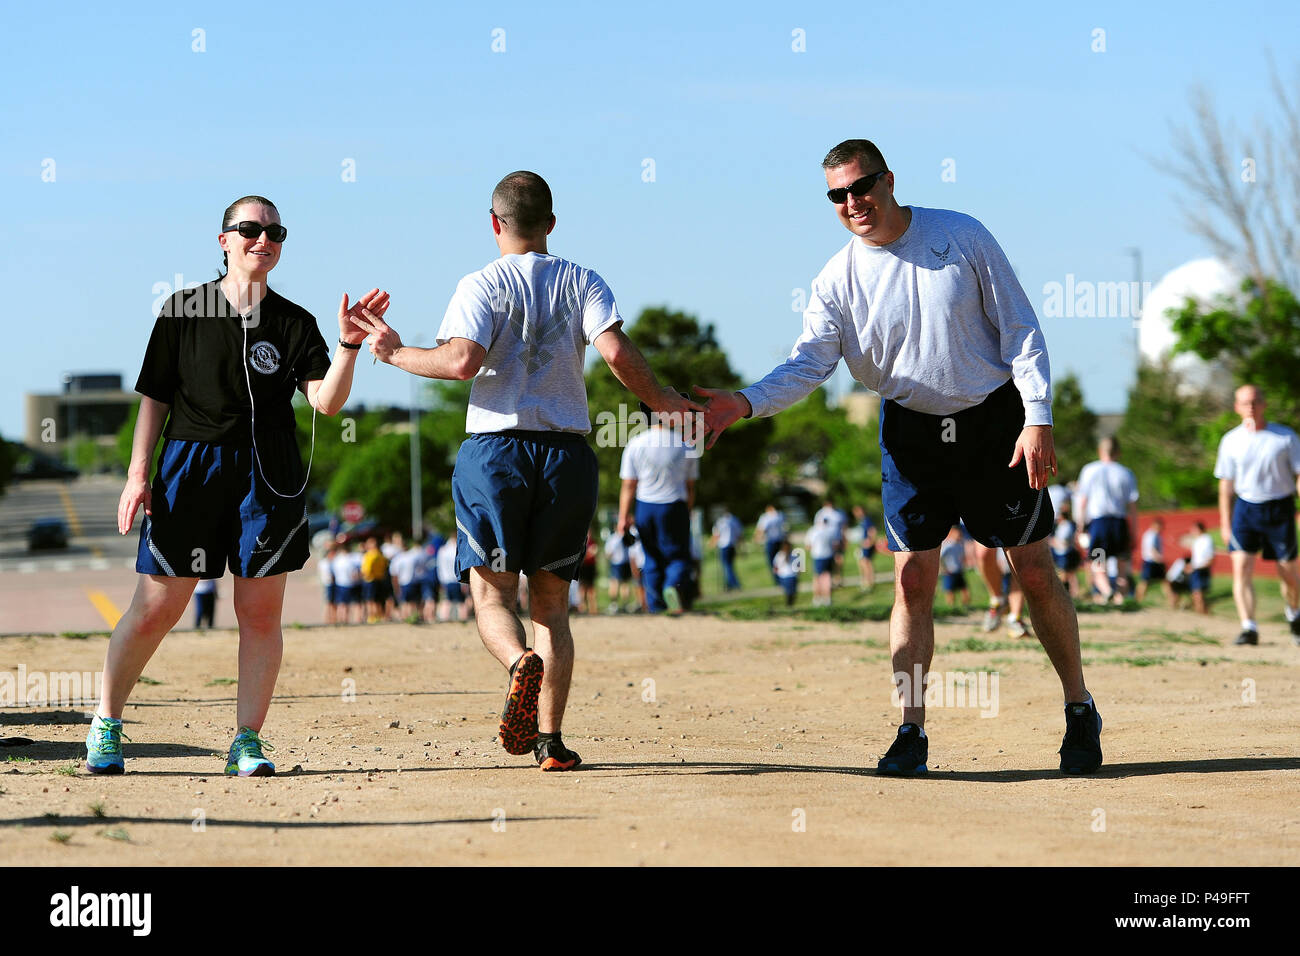 SCHRIEVER AIR FORCE BASE, Colo. -- Senior Master Sergeants Patricia Ford and Patrick Kincaid greet members of the 50th Space Wing as they complete the monthly Warfit Run 8 June 2016.  (U.S. Air Force Photo/Dennis Rogers) Stock Photo